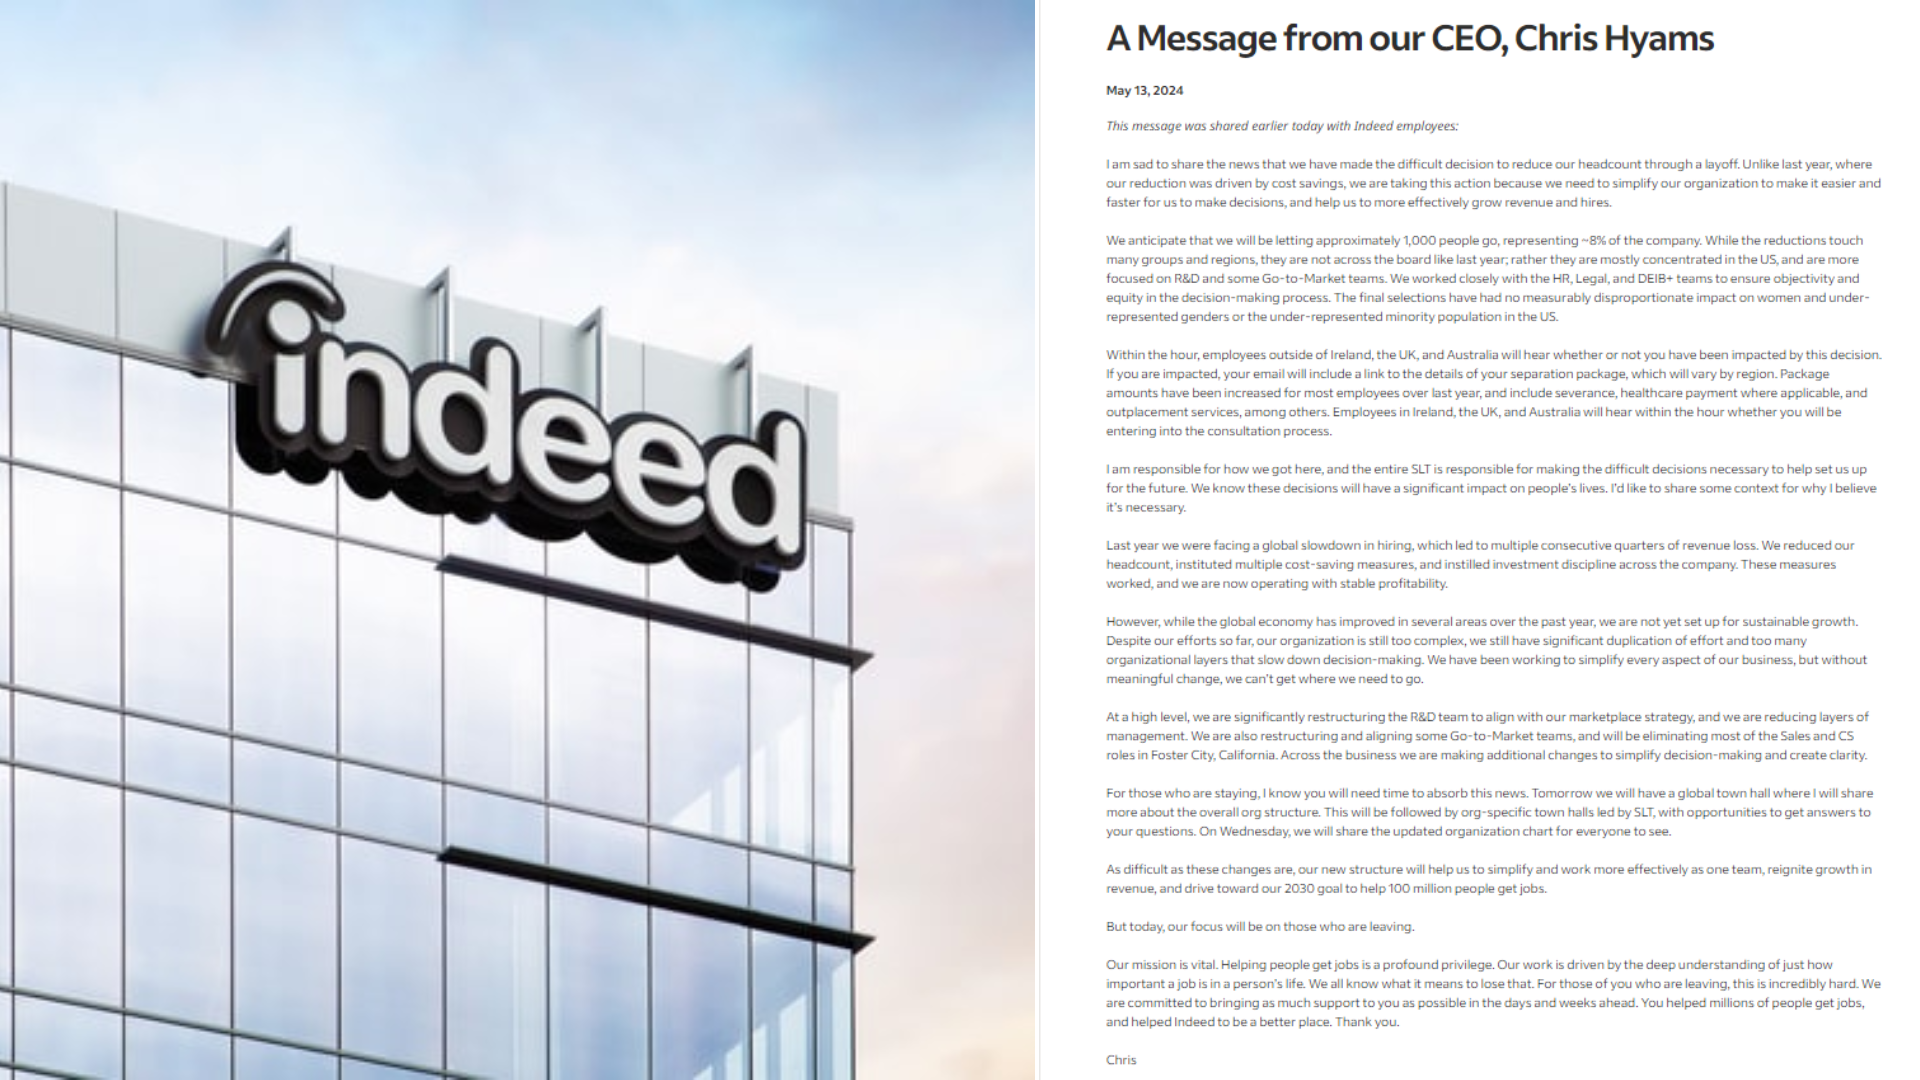 CEO Apologizes As Indeed Cuts Jobs for 1,000 Workers Amid Layoffs